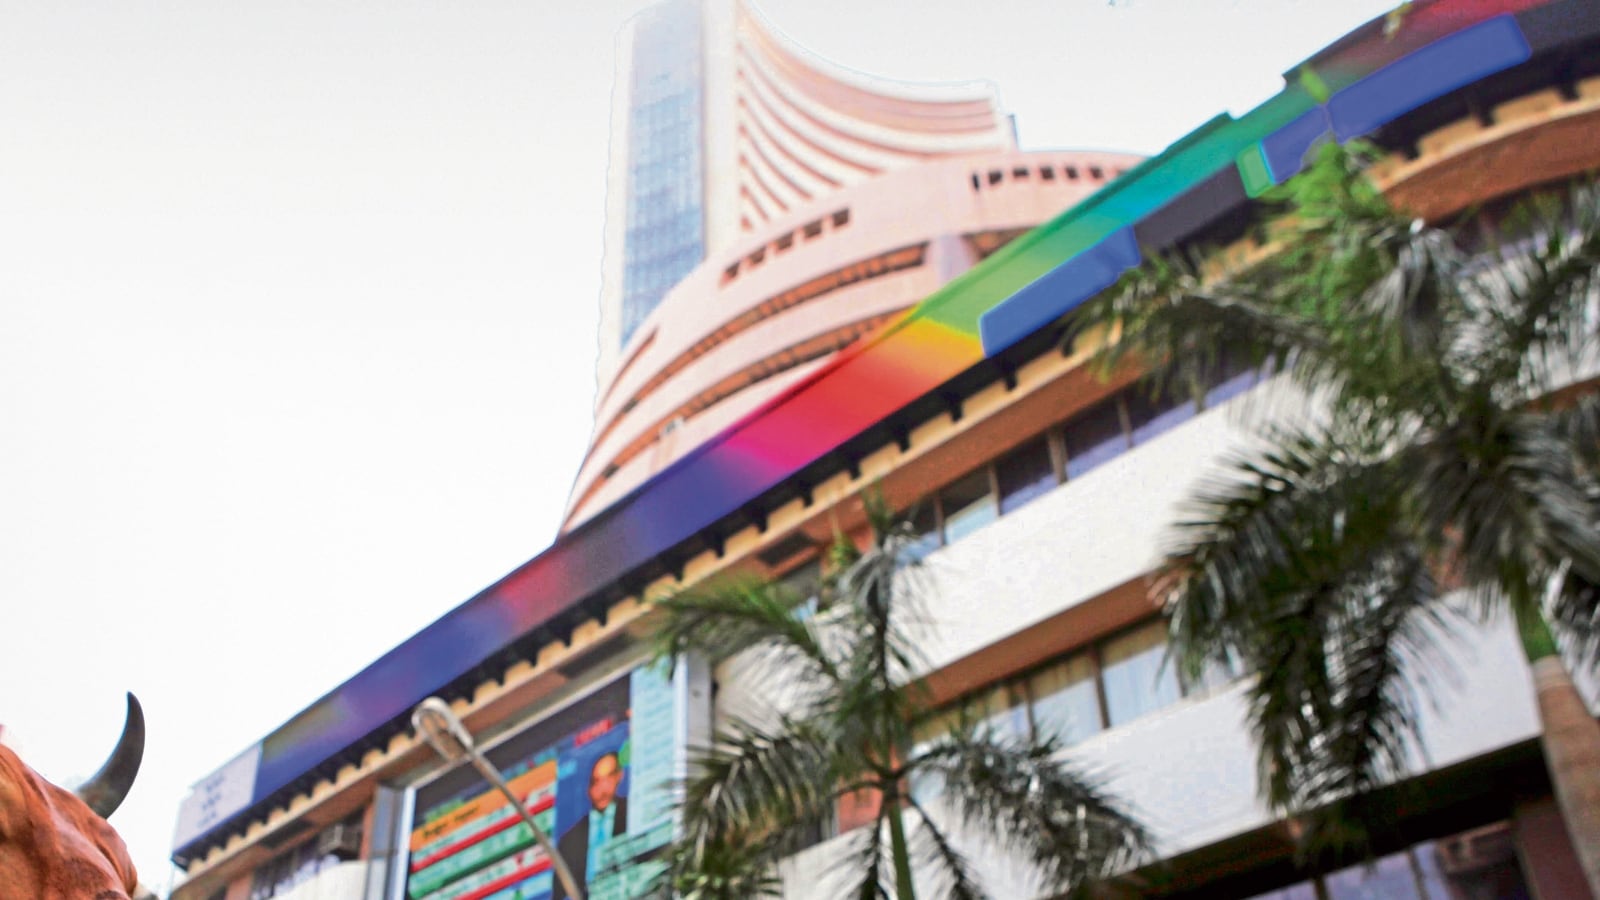 Sensex ends day 100 points down, settles at 53,134; Nifty falls marginally to 15,810